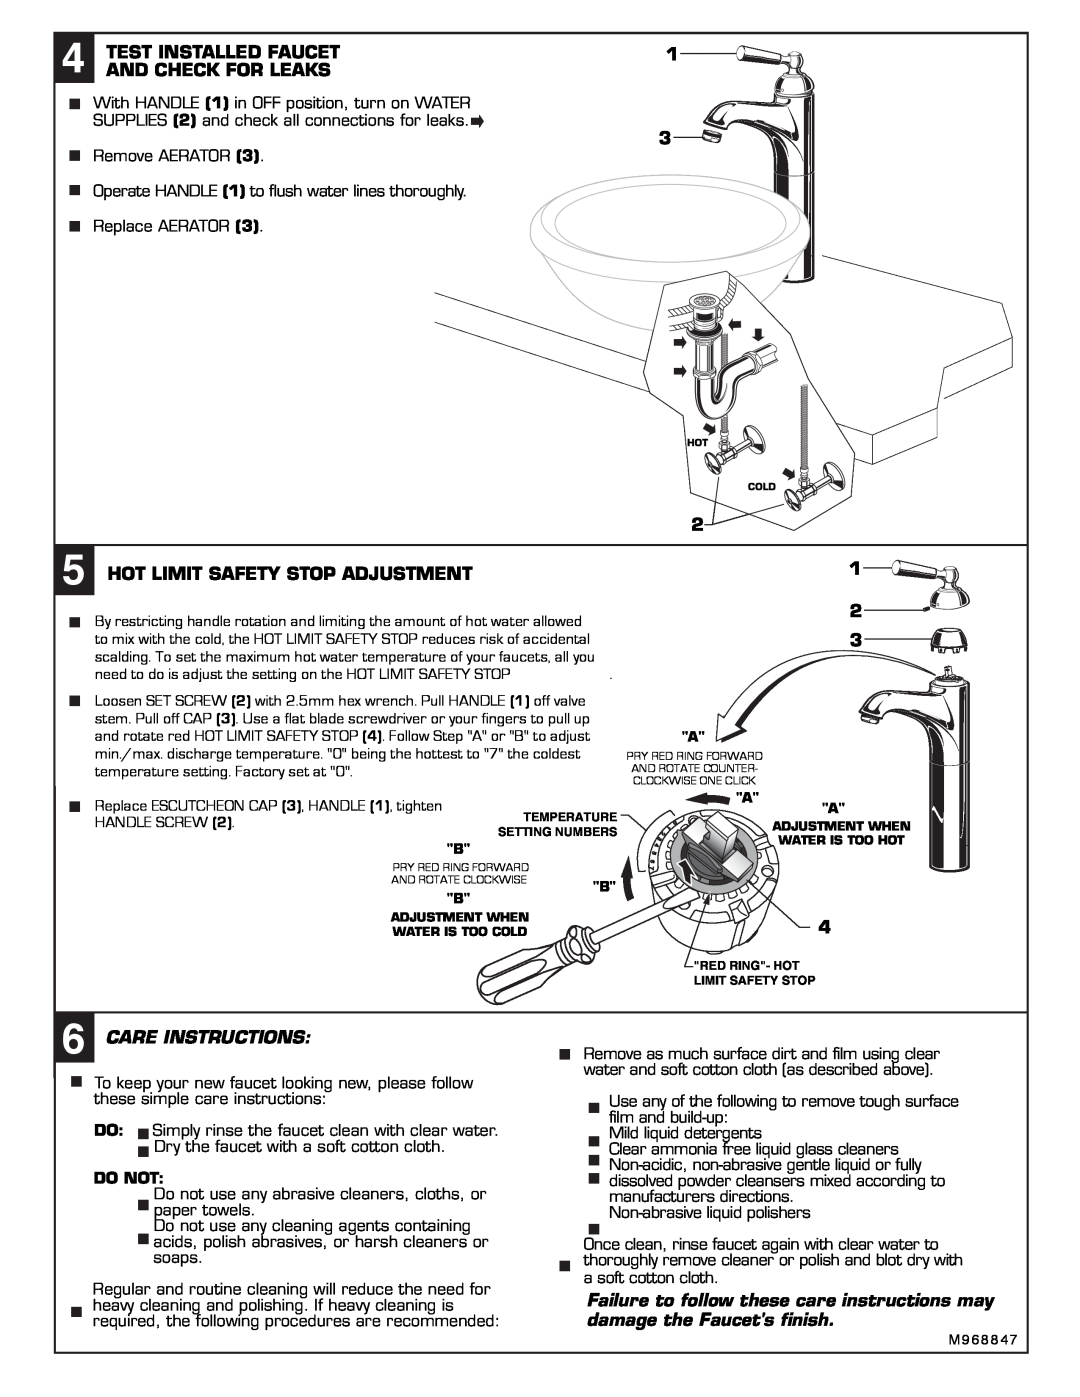 American Standard 4962.151 Test Installed Faucet, And Check For Leaks, Hot Limit Safety Stop Adjustment, Care Instructions 